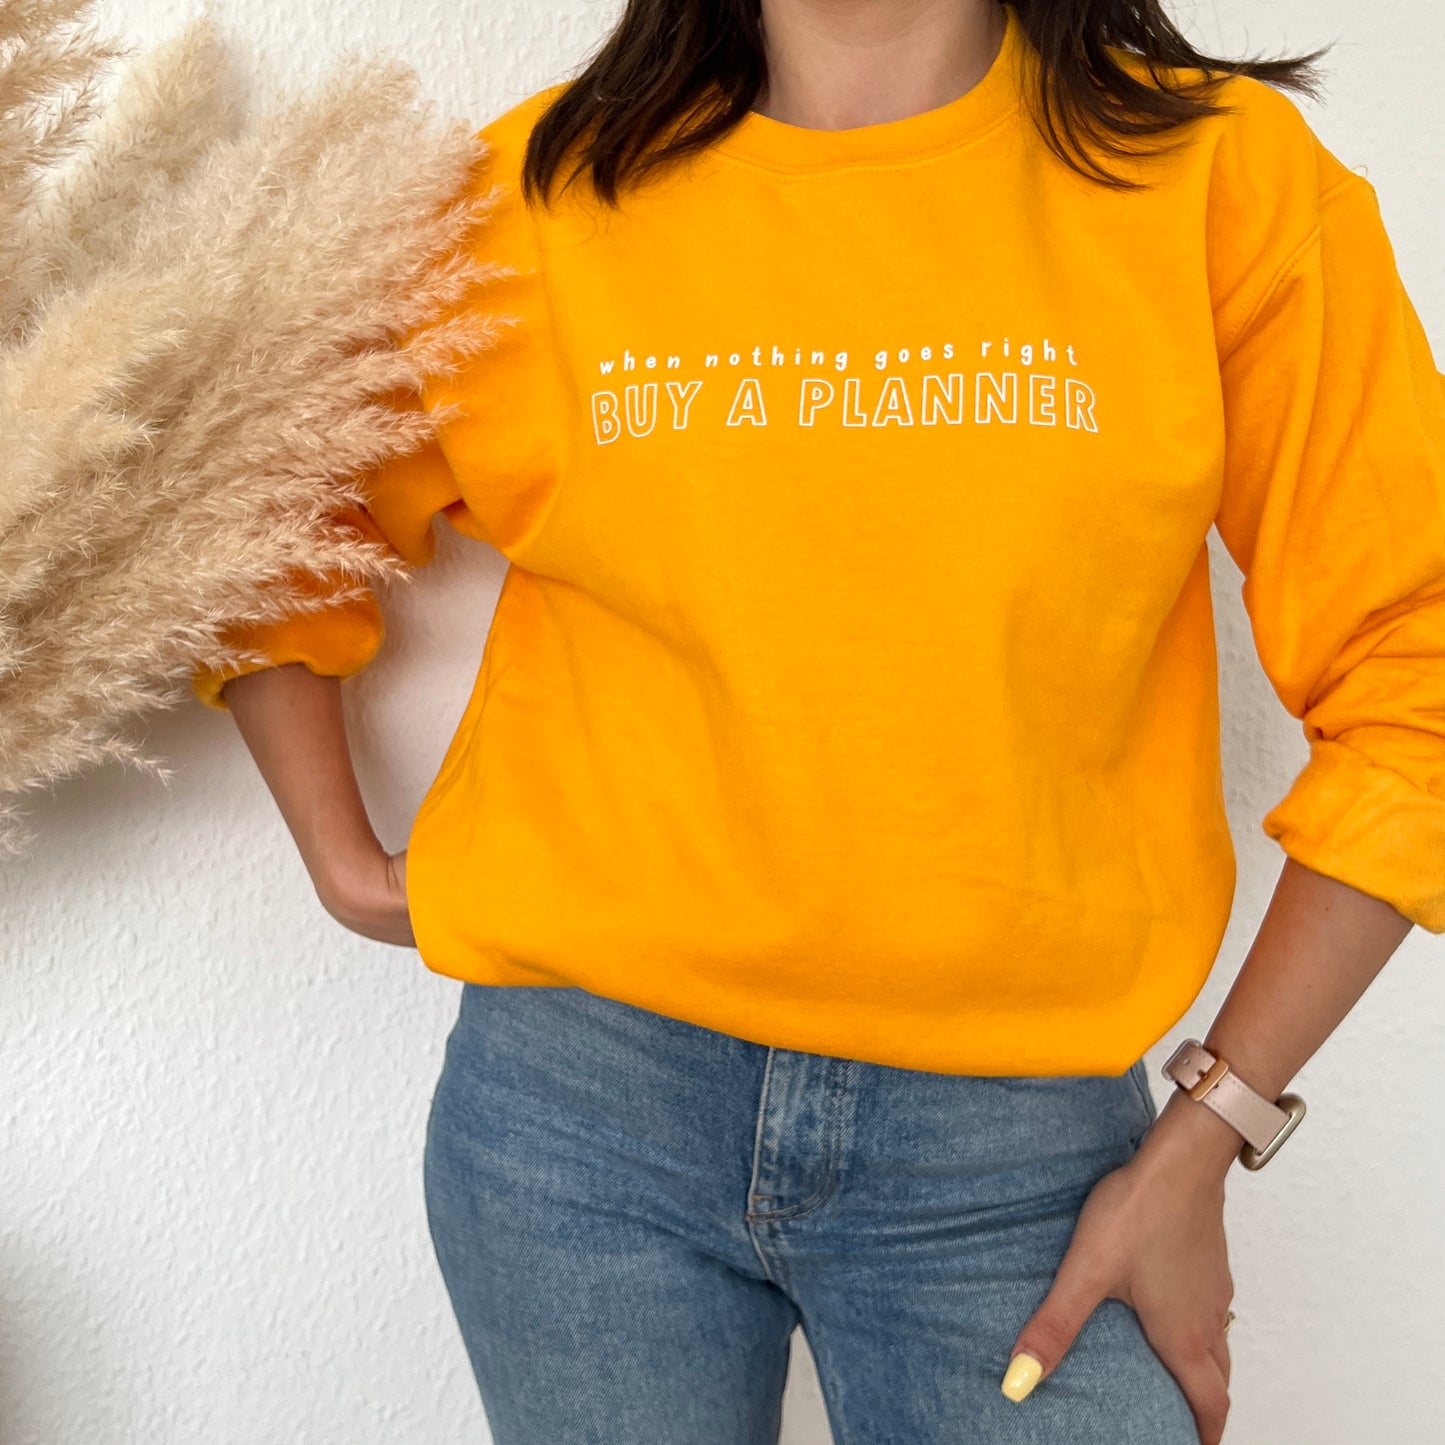 "When nothing goes right, buy a planner" Sweatshirt/Hoodie • Choose your own colours • Planner Collection